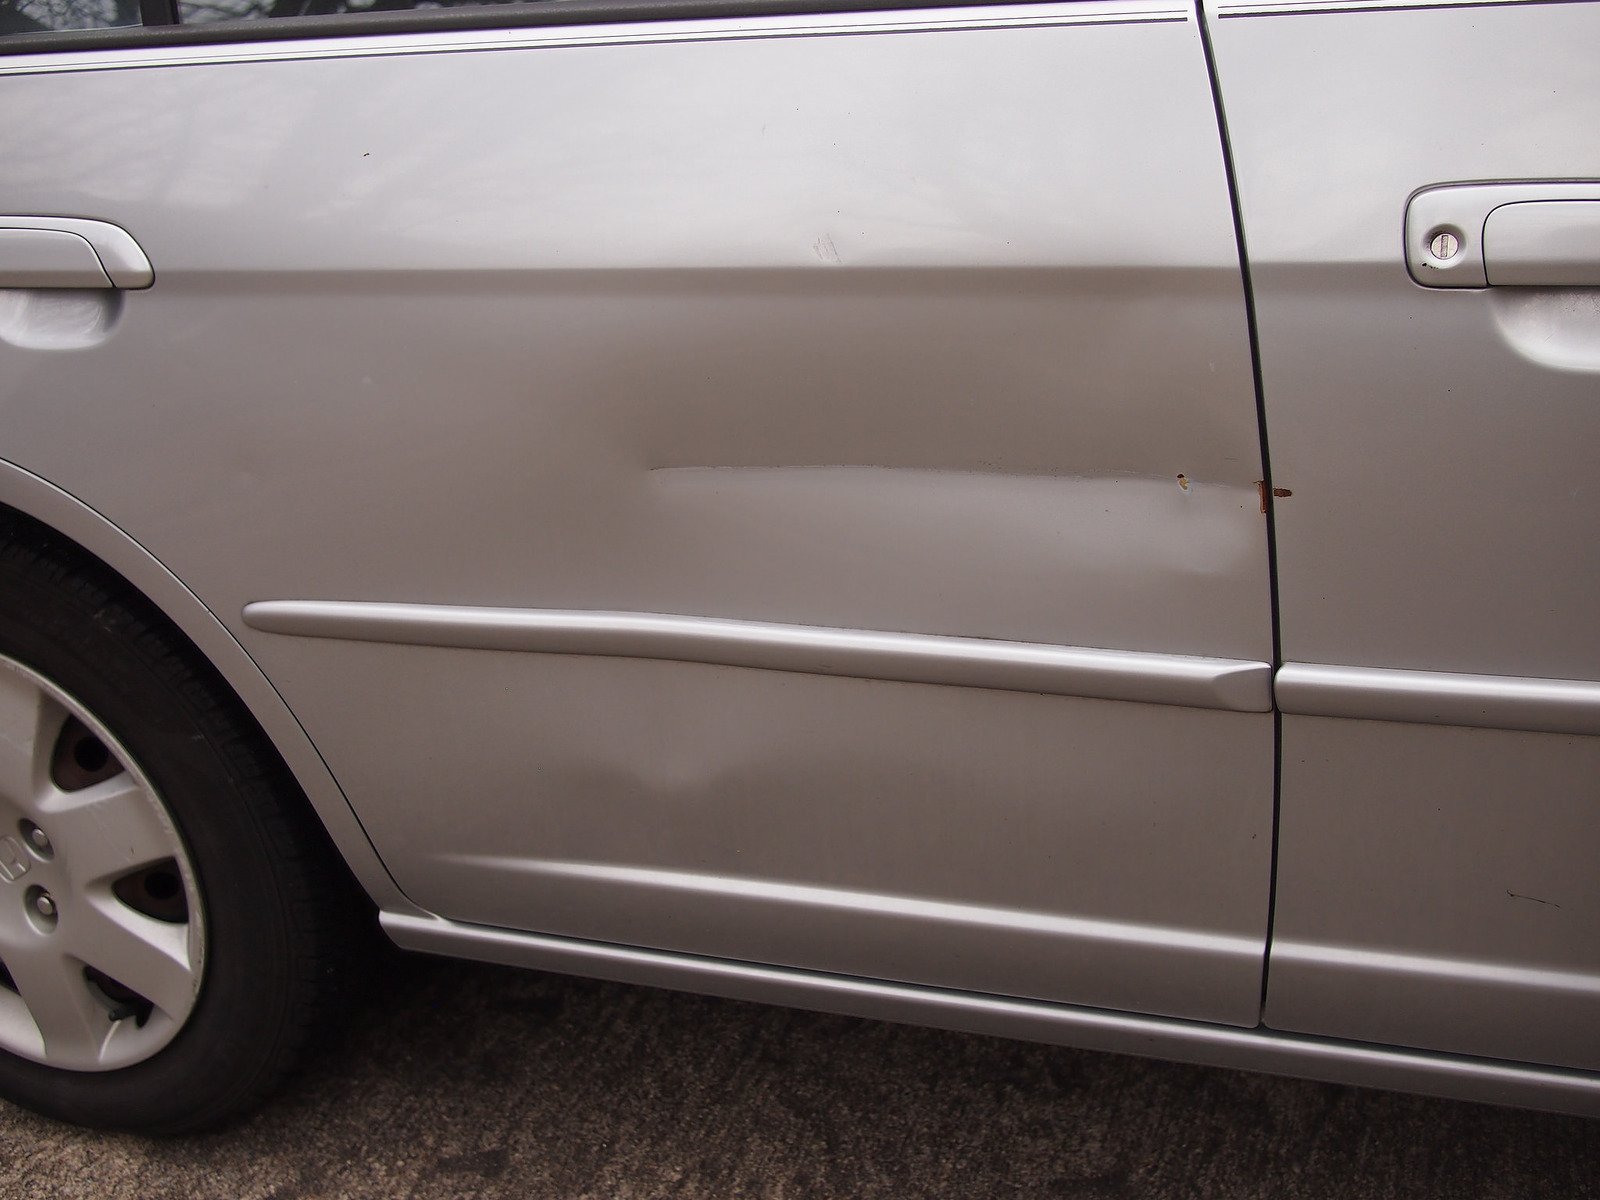 Is it worth filing a car insurance claim for a dented door?